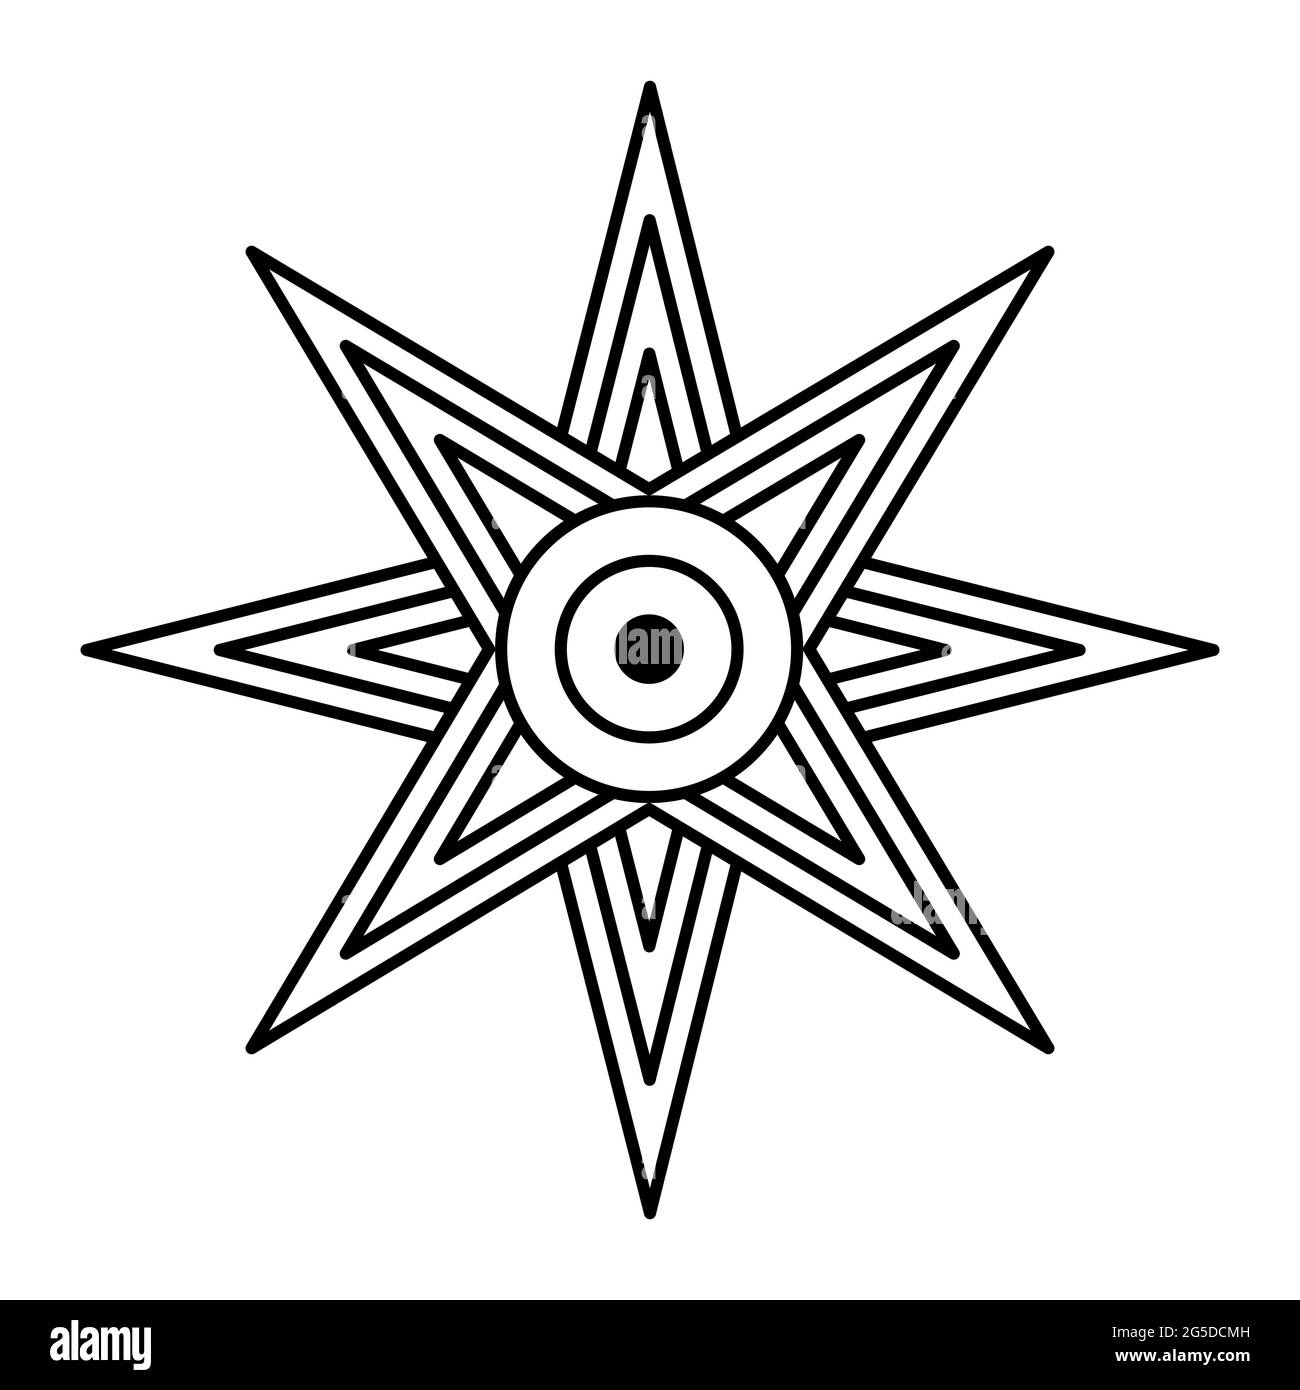 Star of Ishtar or Inanna, also known as the Star of Venus, usually depicted with eight points. Symbol of ancient Sumerian goddess Inanna. Stock Photo